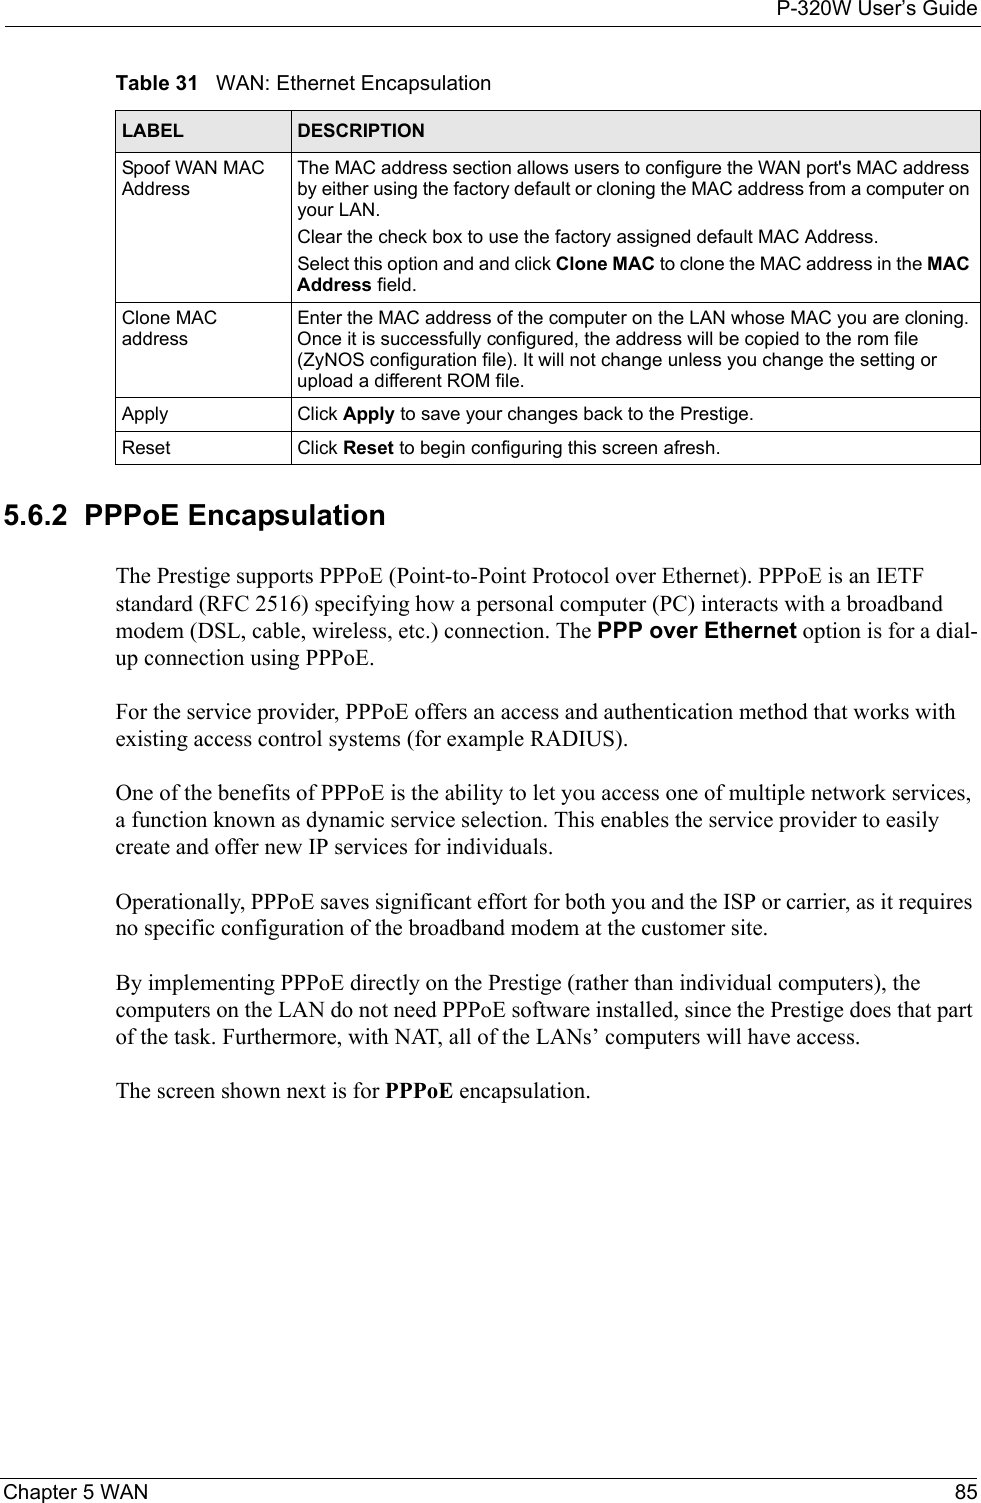 P-320W User’s GuideChapter 5 WAN 855.6.2  PPPoE EncapsulationThe Prestige supports PPPoE (Point-to-Point Protocol over Ethernet). PPPoE is an IETF  standard (RFC 2516) specifying how a personal computer (PC) interacts with a broadband modem (DSL, cable, wireless, etc.) connection. The PPP over Ethernet option is for a dial-up connection using PPPoE.For the service provider, PPPoE offers an access and authentication method that works with existing access control systems (for example RADIUS).One of the benefits of PPPoE is the ability to let you access one of multiple network services, a function known as dynamic service selection. This enables the service provider to easily create and offer new IP services for individuals.Operationally, PPPoE saves significant effort for both you and the ISP or carrier, as it requires no specific configuration of the broadband modem at the customer site.By implementing PPPoE directly on the Prestige (rather than individual computers), the computers on the LAN do not need PPPoE software installed, since the Prestige does that part of the task. Furthermore, with NAT, all of the LANs’ computers will have access.The screen shown next is for PPPoE encapsulation.Spoof WAN MAC AddressThe MAC address section allows users to configure the WAN port&apos;s MAC address by either using the factory default or cloning the MAC address from a computer on your LAN. Clear the check box to use the factory assigned default MAC Address.Select this option and and click Clone MAC to clone the MAC address in the MAC Address field.Clone MAC addressEnter the MAC address of the computer on the LAN whose MAC you are cloning. Once it is successfully configured, the address will be copied to the rom file (ZyNOS configuration file). It will not change unless you change the setting or upload a different ROM file. Apply Click Apply to save your changes back to the Prestige.Reset Click Reset to begin configuring this screen afresh.Table 31   WAN: Ethernet EncapsulationLABEL DESCRIPTION